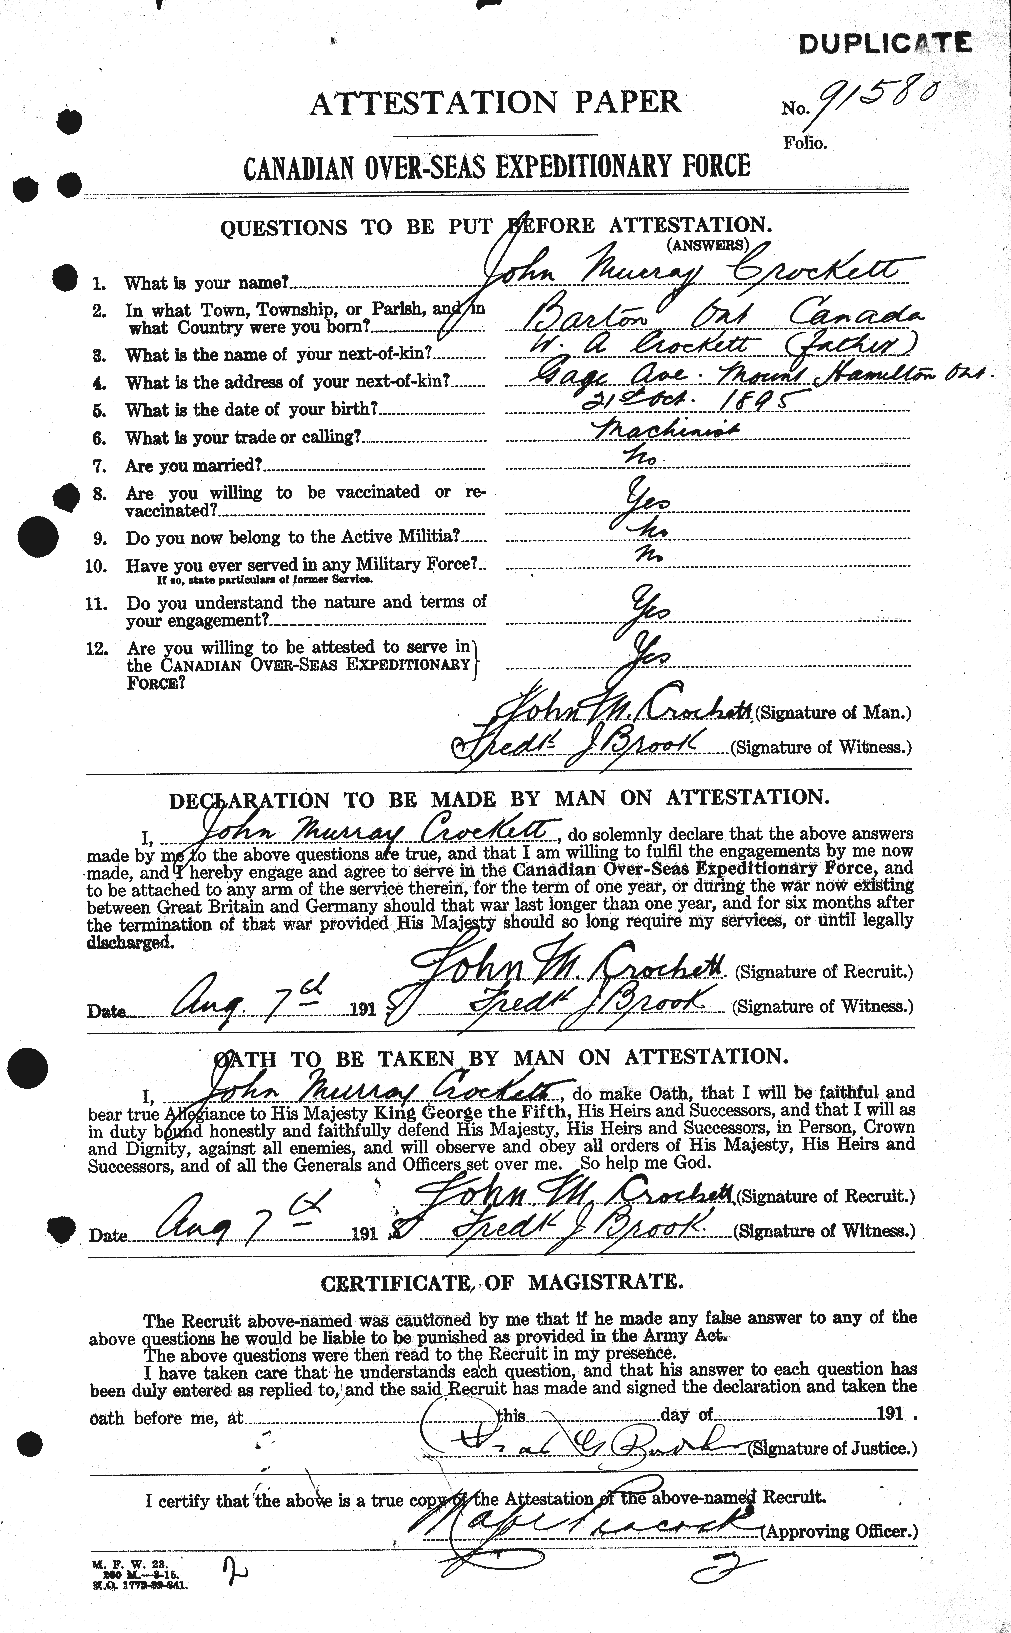 Personnel Records of the First World War - CEF 064697a